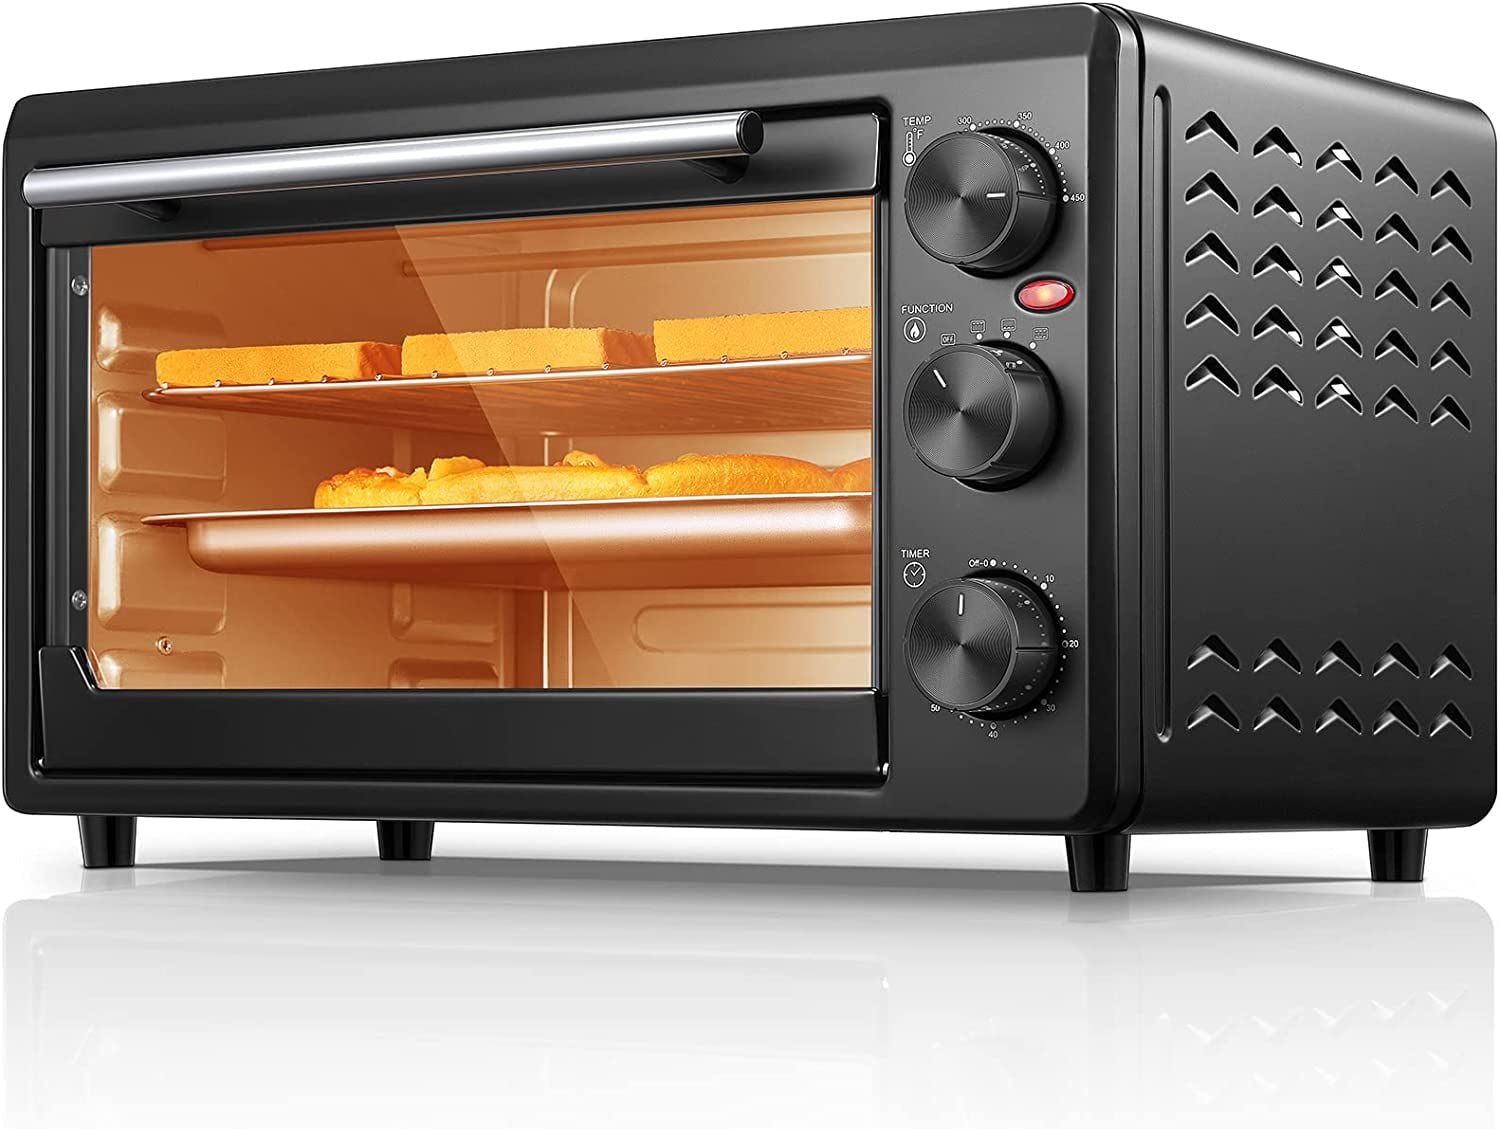 Russell Hobbs 220 volts Toaster Oven Air Fryer Convection Oven Bake Grill  Stainless Steel Stainless Steel 220v 240 volt 1500 Watts 26095